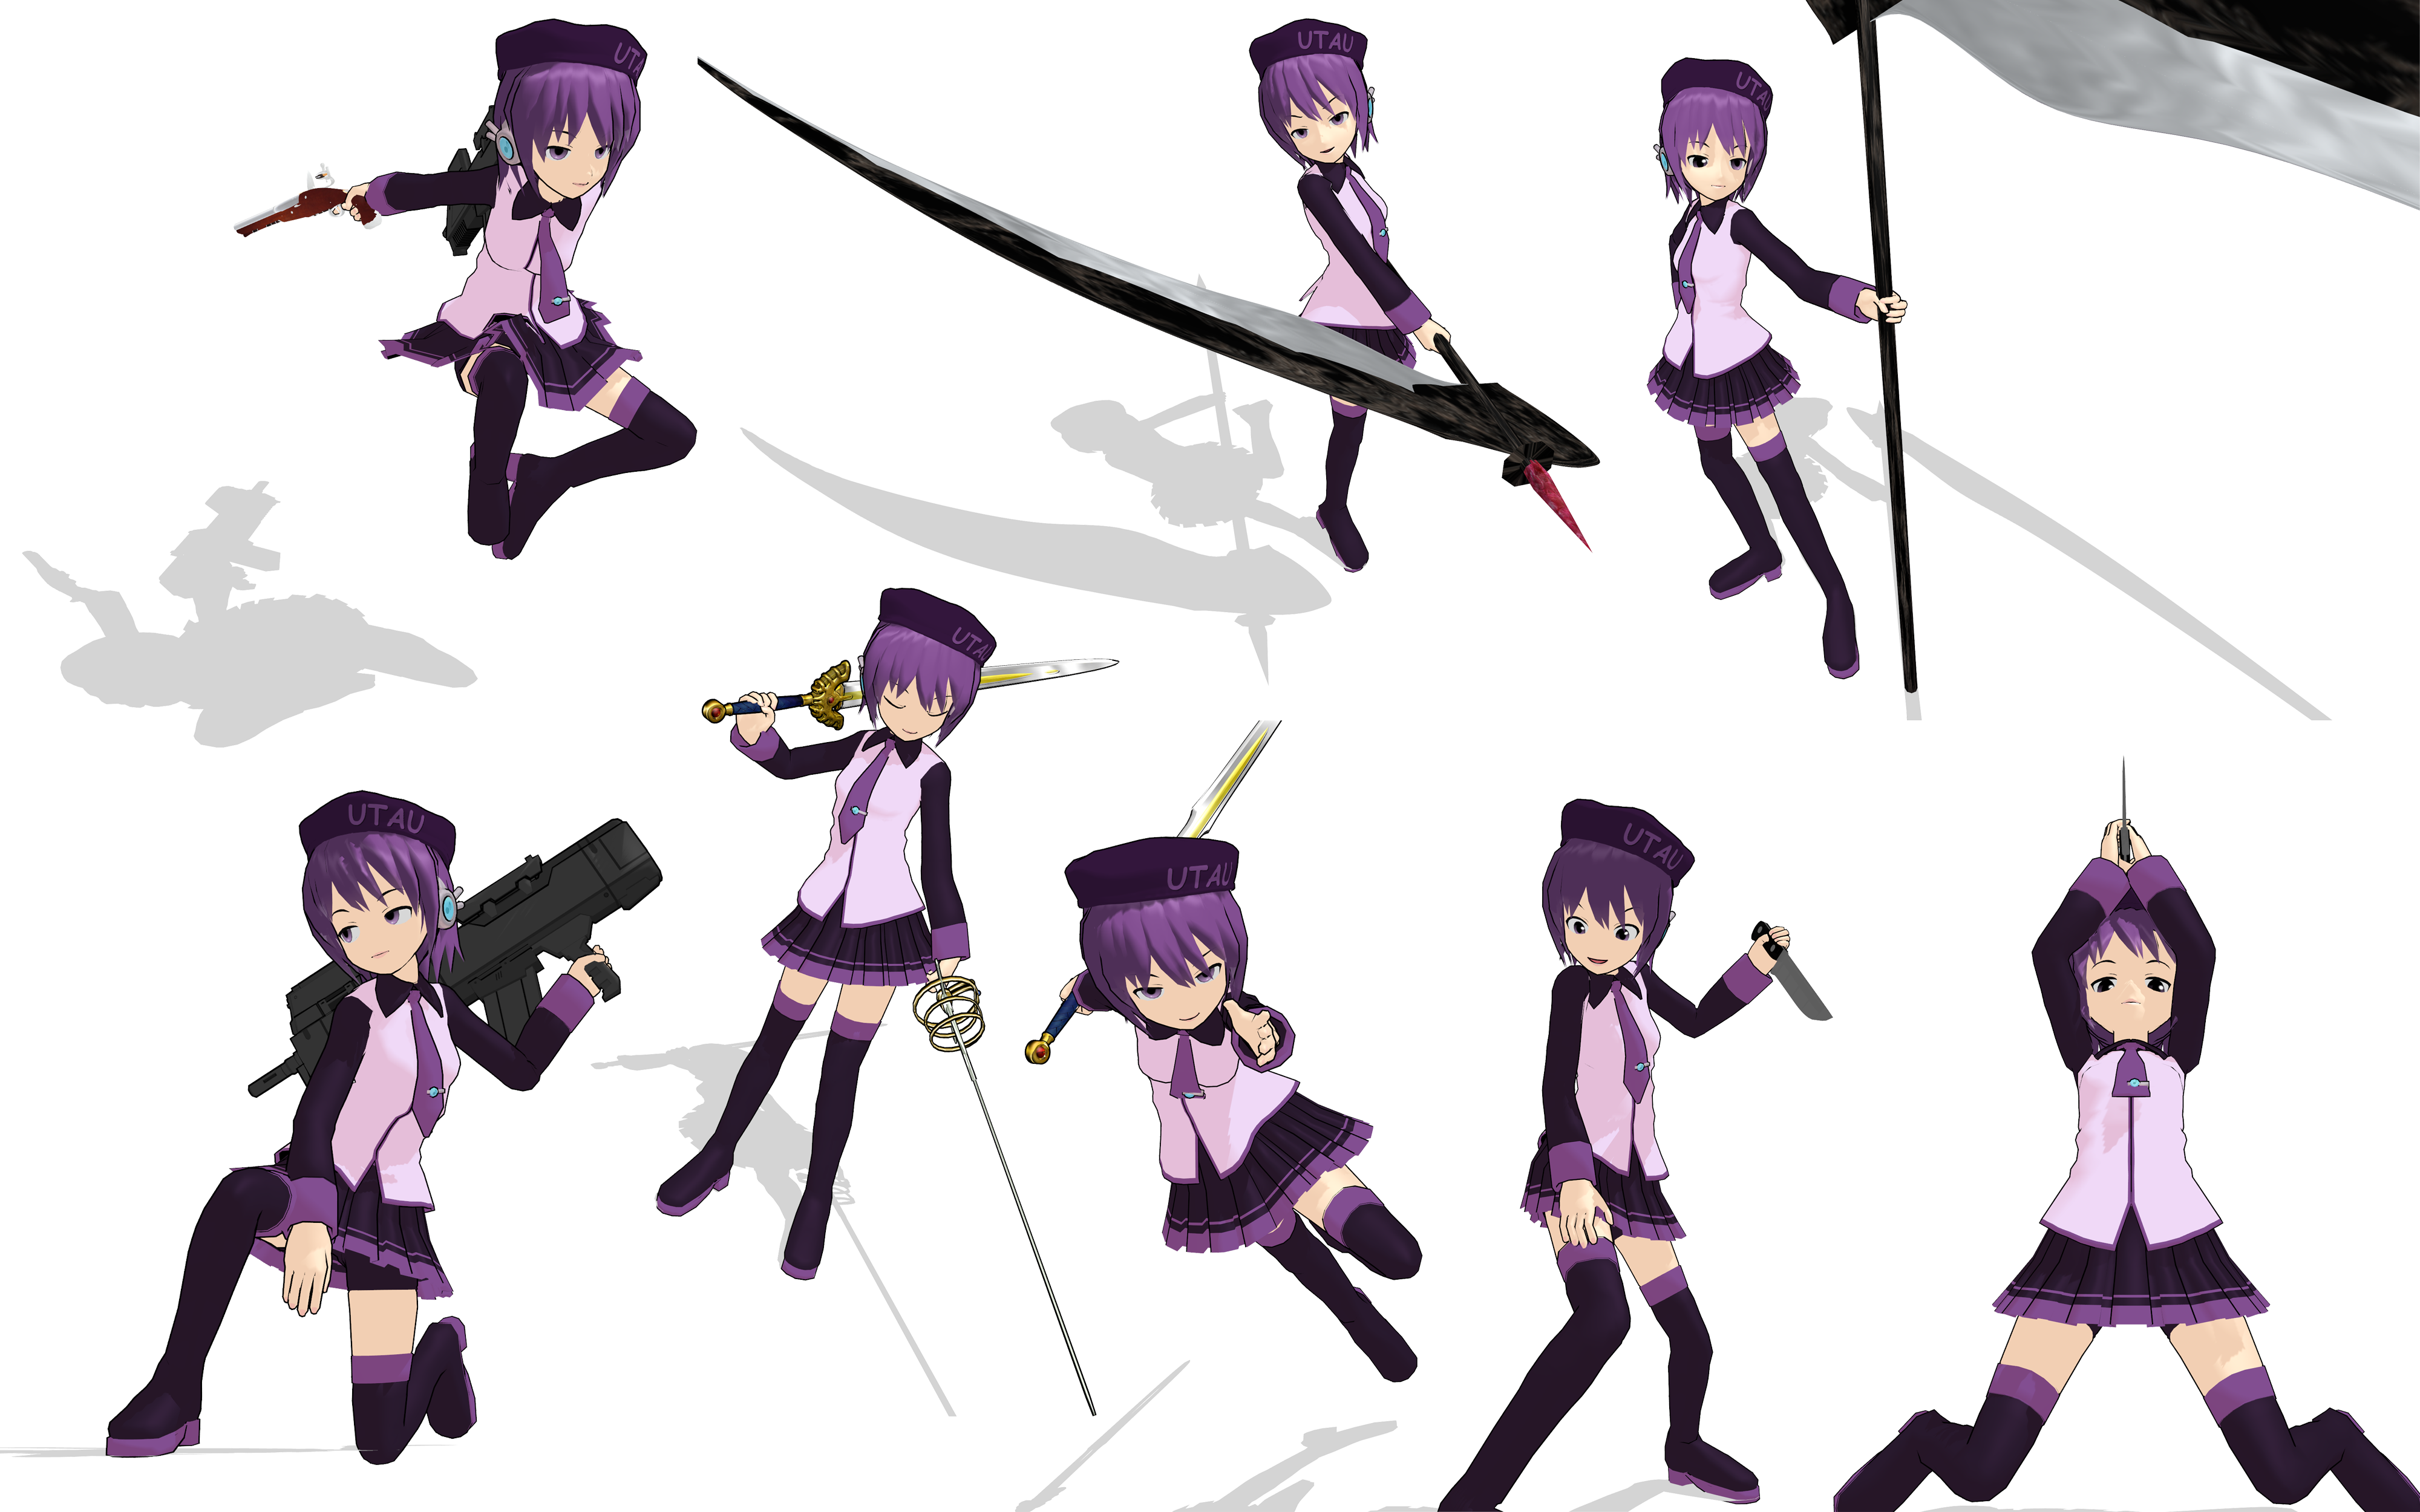 Mmd Pose Pack 8 Fighting Poses By Asparagusmmd On Deviantart